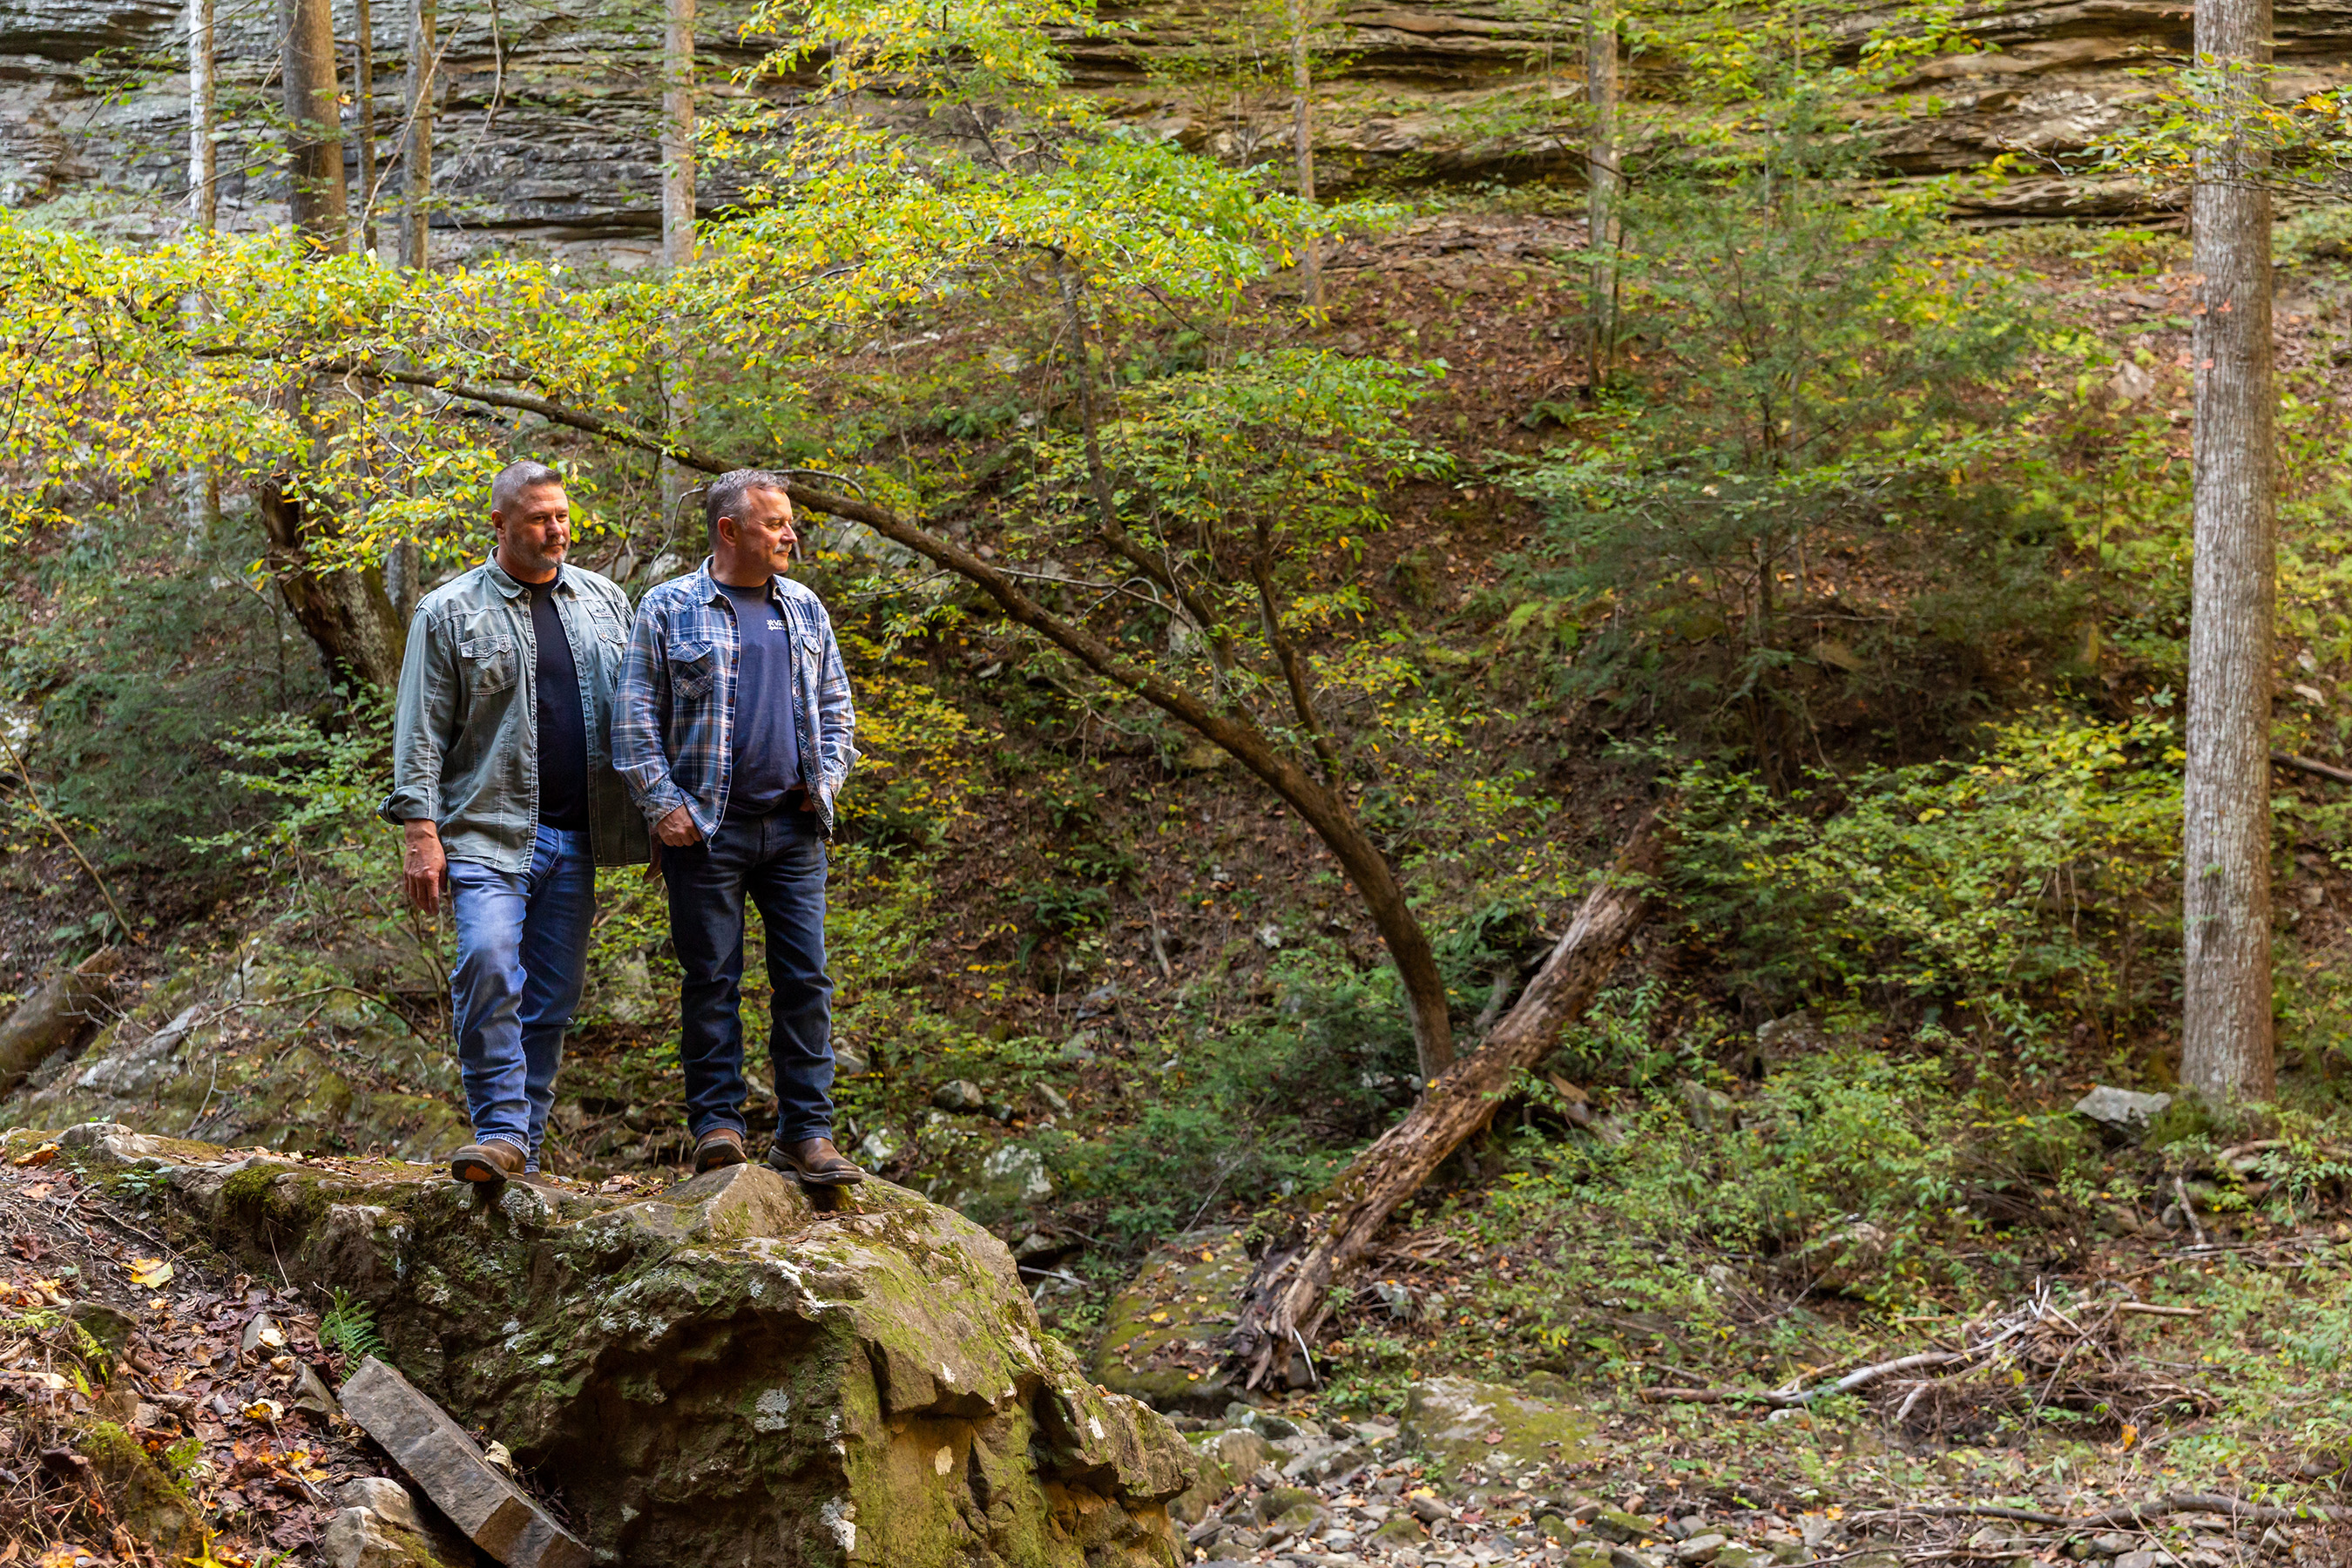 Designer Cottage homeowners, Jack and Harlen, explore the hiking trails of the Deer Lick Falls tiny community.